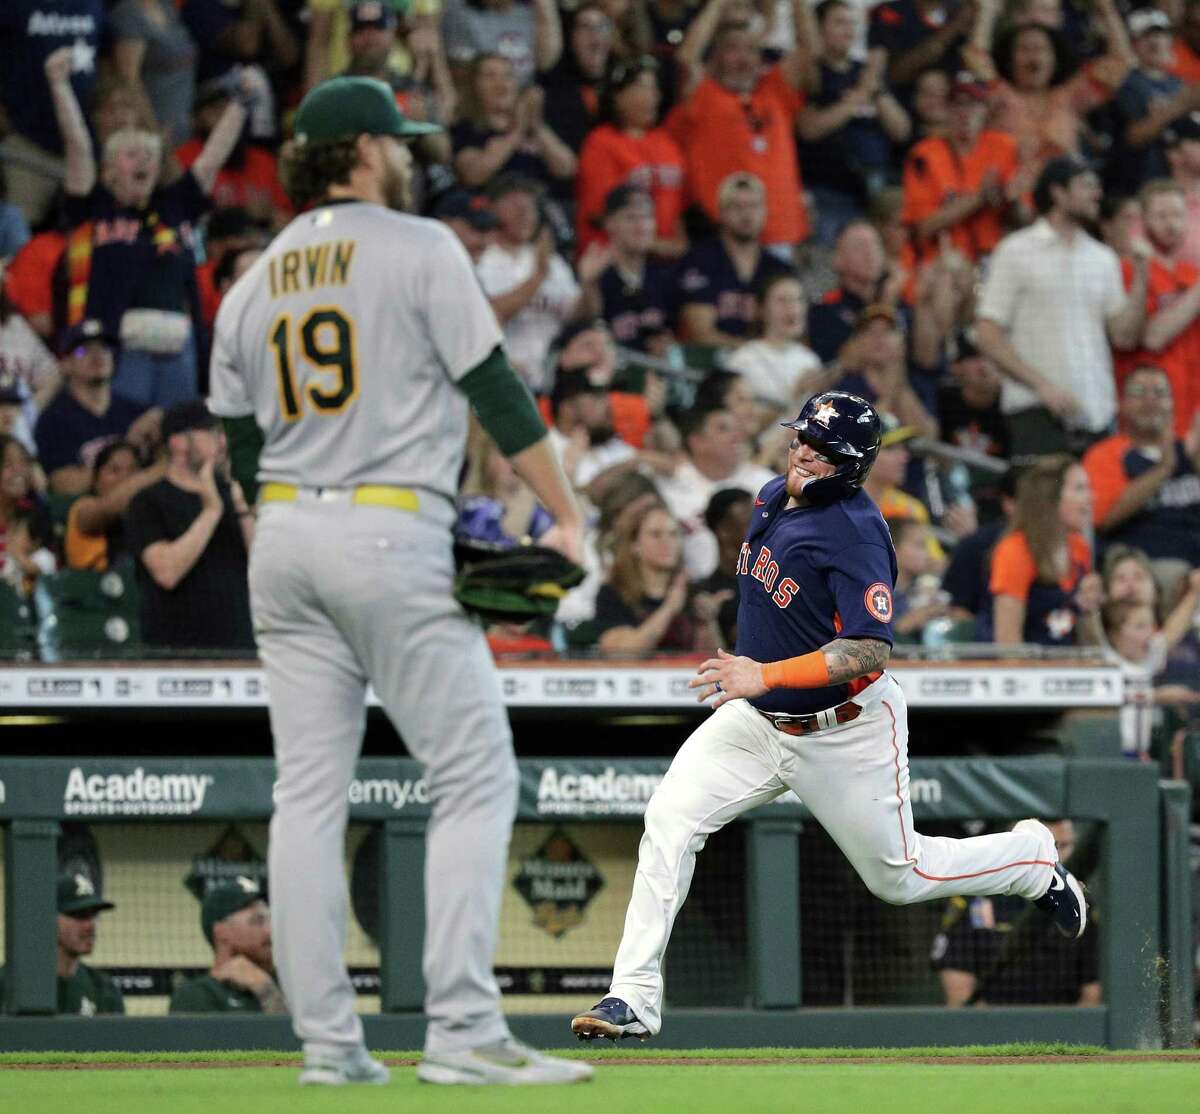 HOUSTON, TEXAS - AUGUST 14: Christian Vazquez #9 of the Houston Astros scores on a double by Jose Altuve #27 in the second inning against the Oakland Athletics at Minute Maid Park on August 14, 2022 in Houston, Texas. (Photo by Bob Levey/Getty Images)